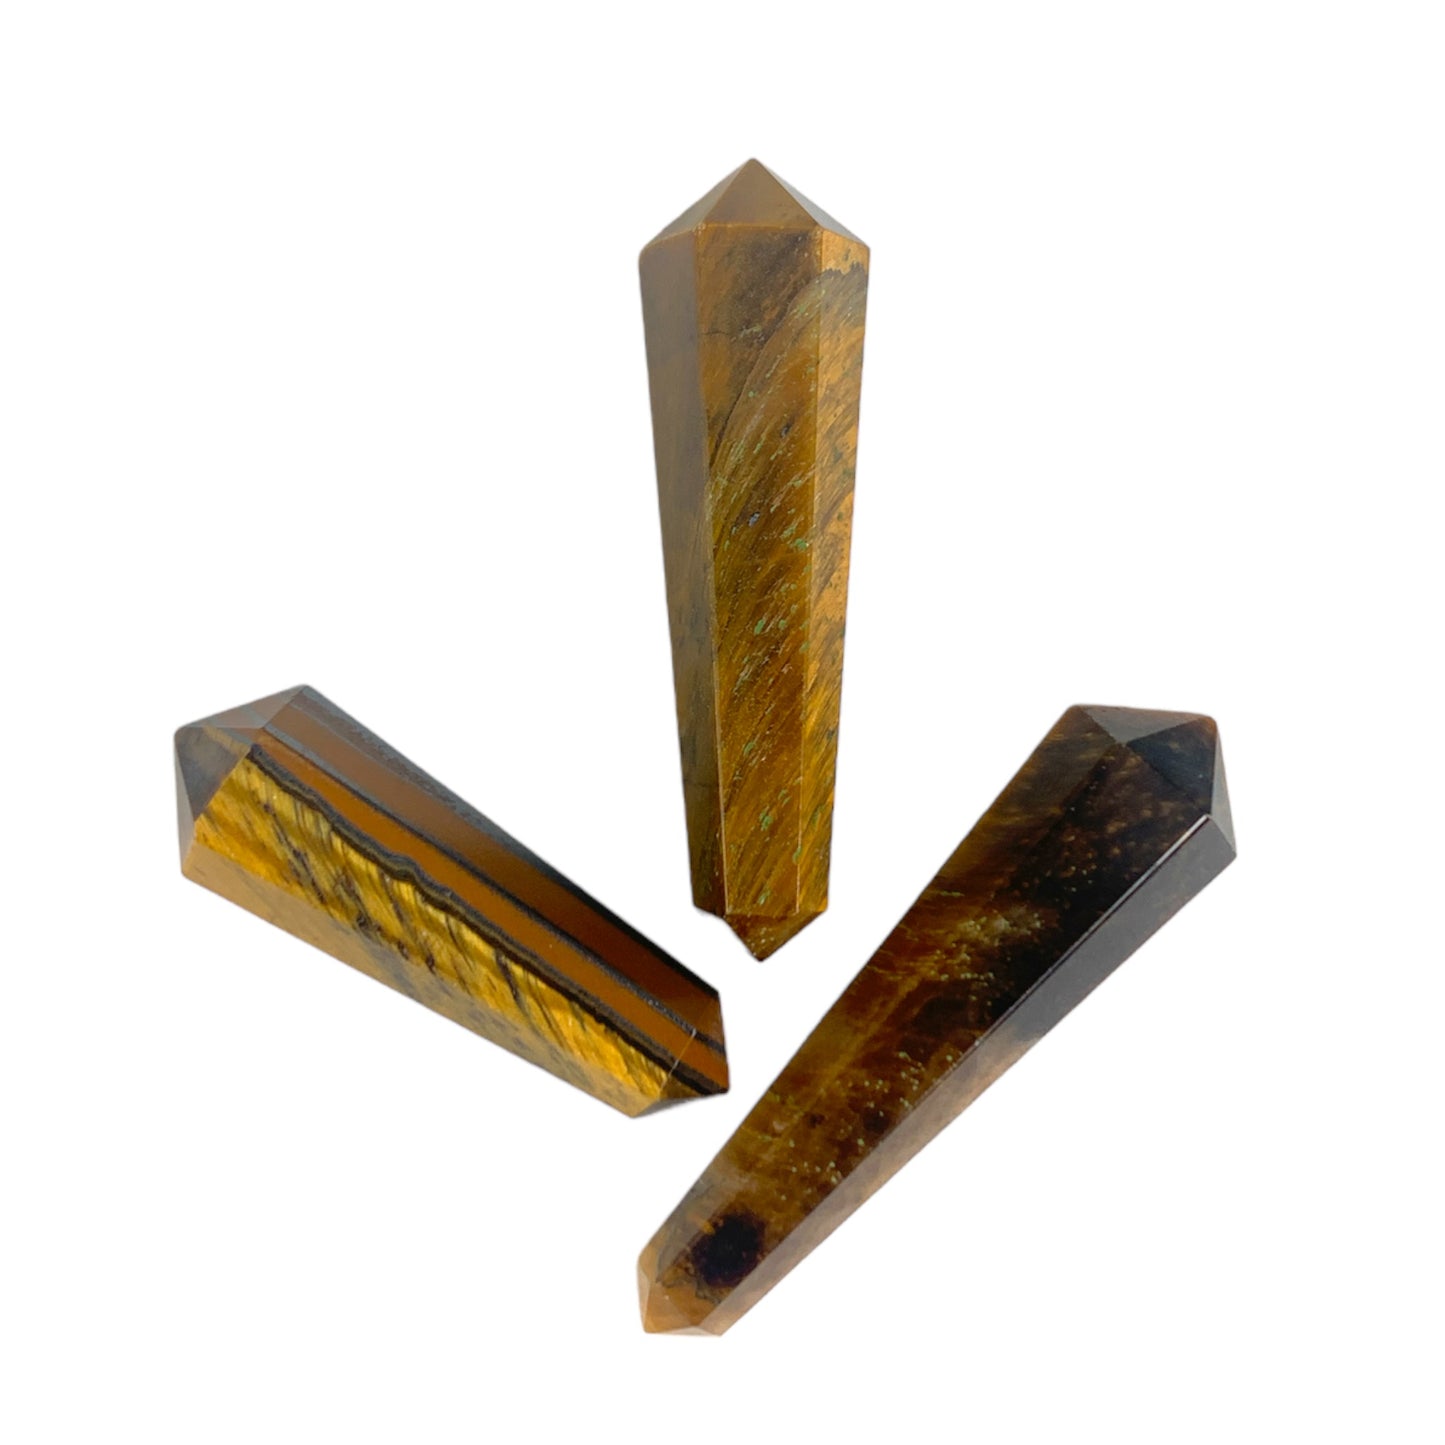 Tiger Eye - 30-35mm - Double Terminated Pencil Points - 6 Grams - India - order in 5's -NEW323